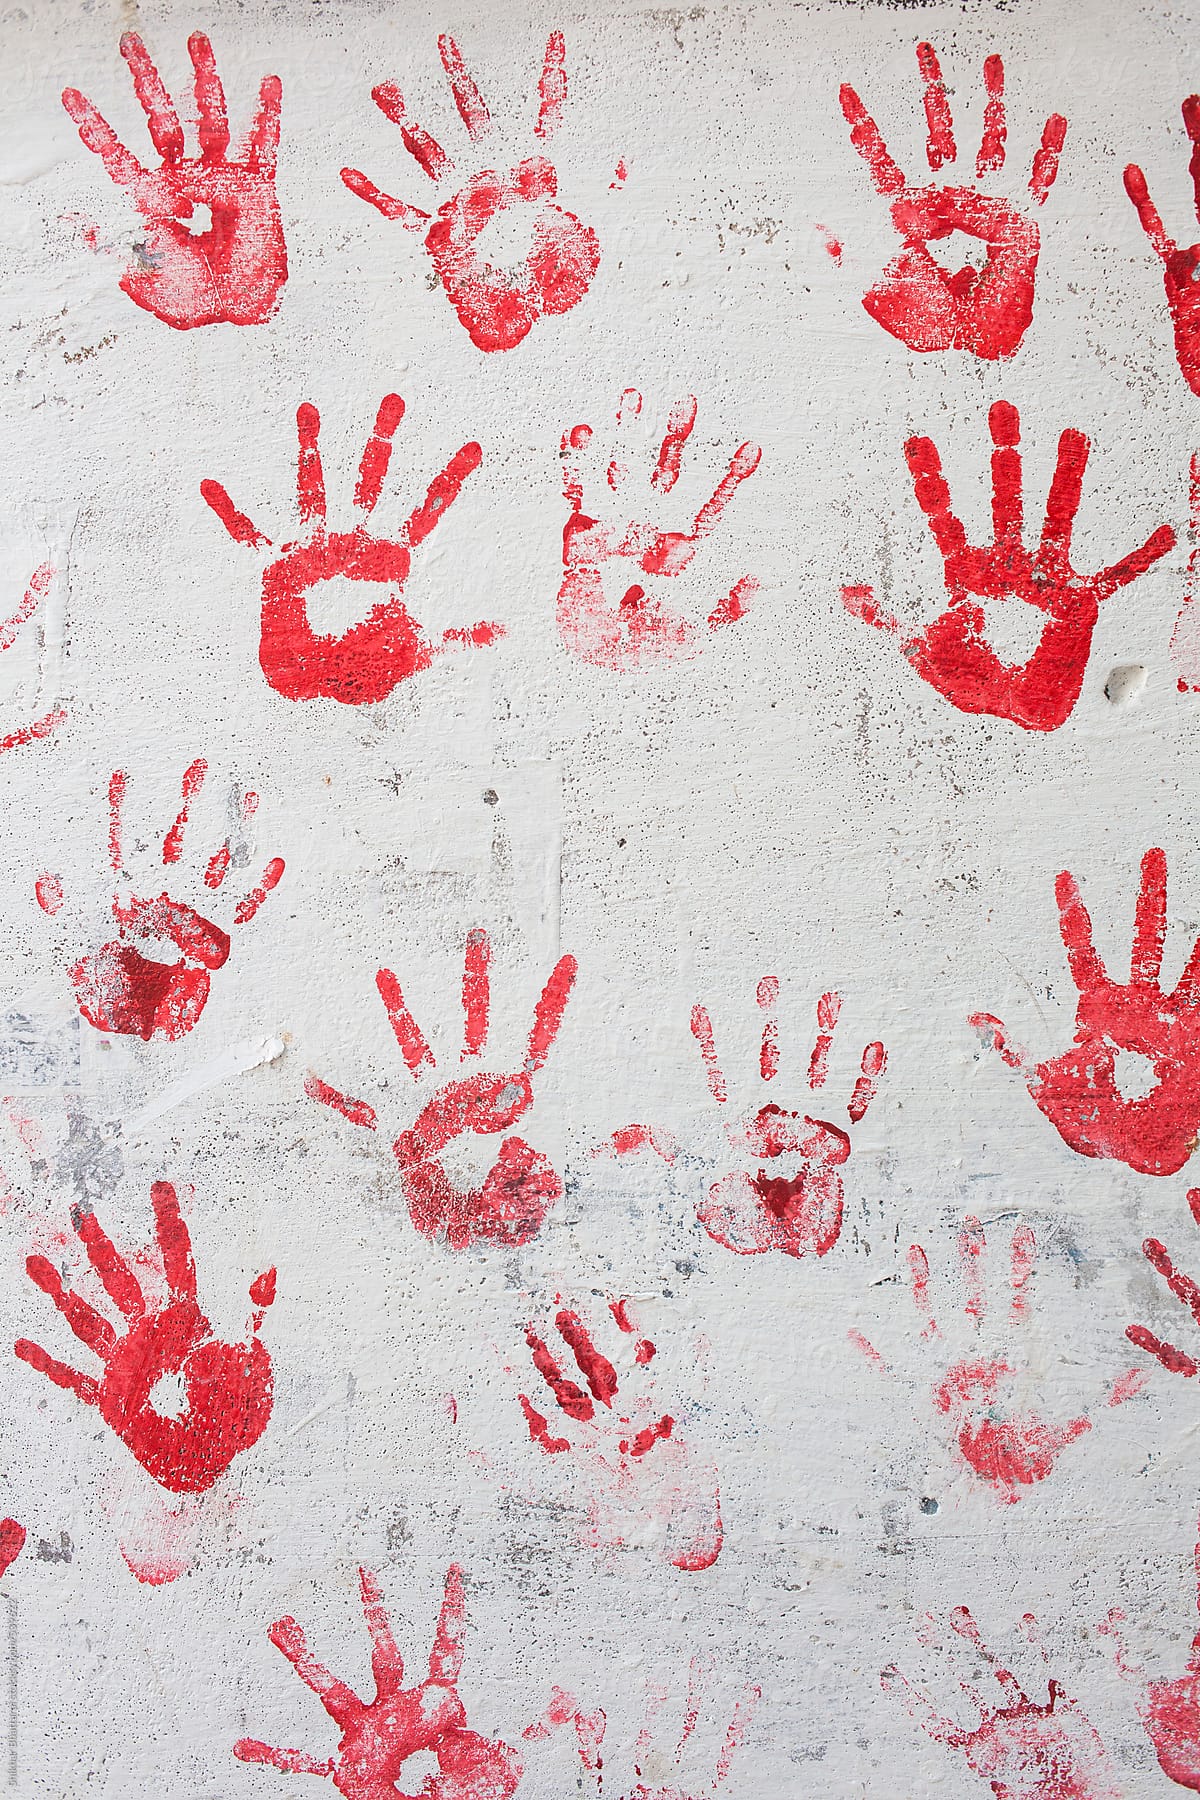 Hand prints on a wall.